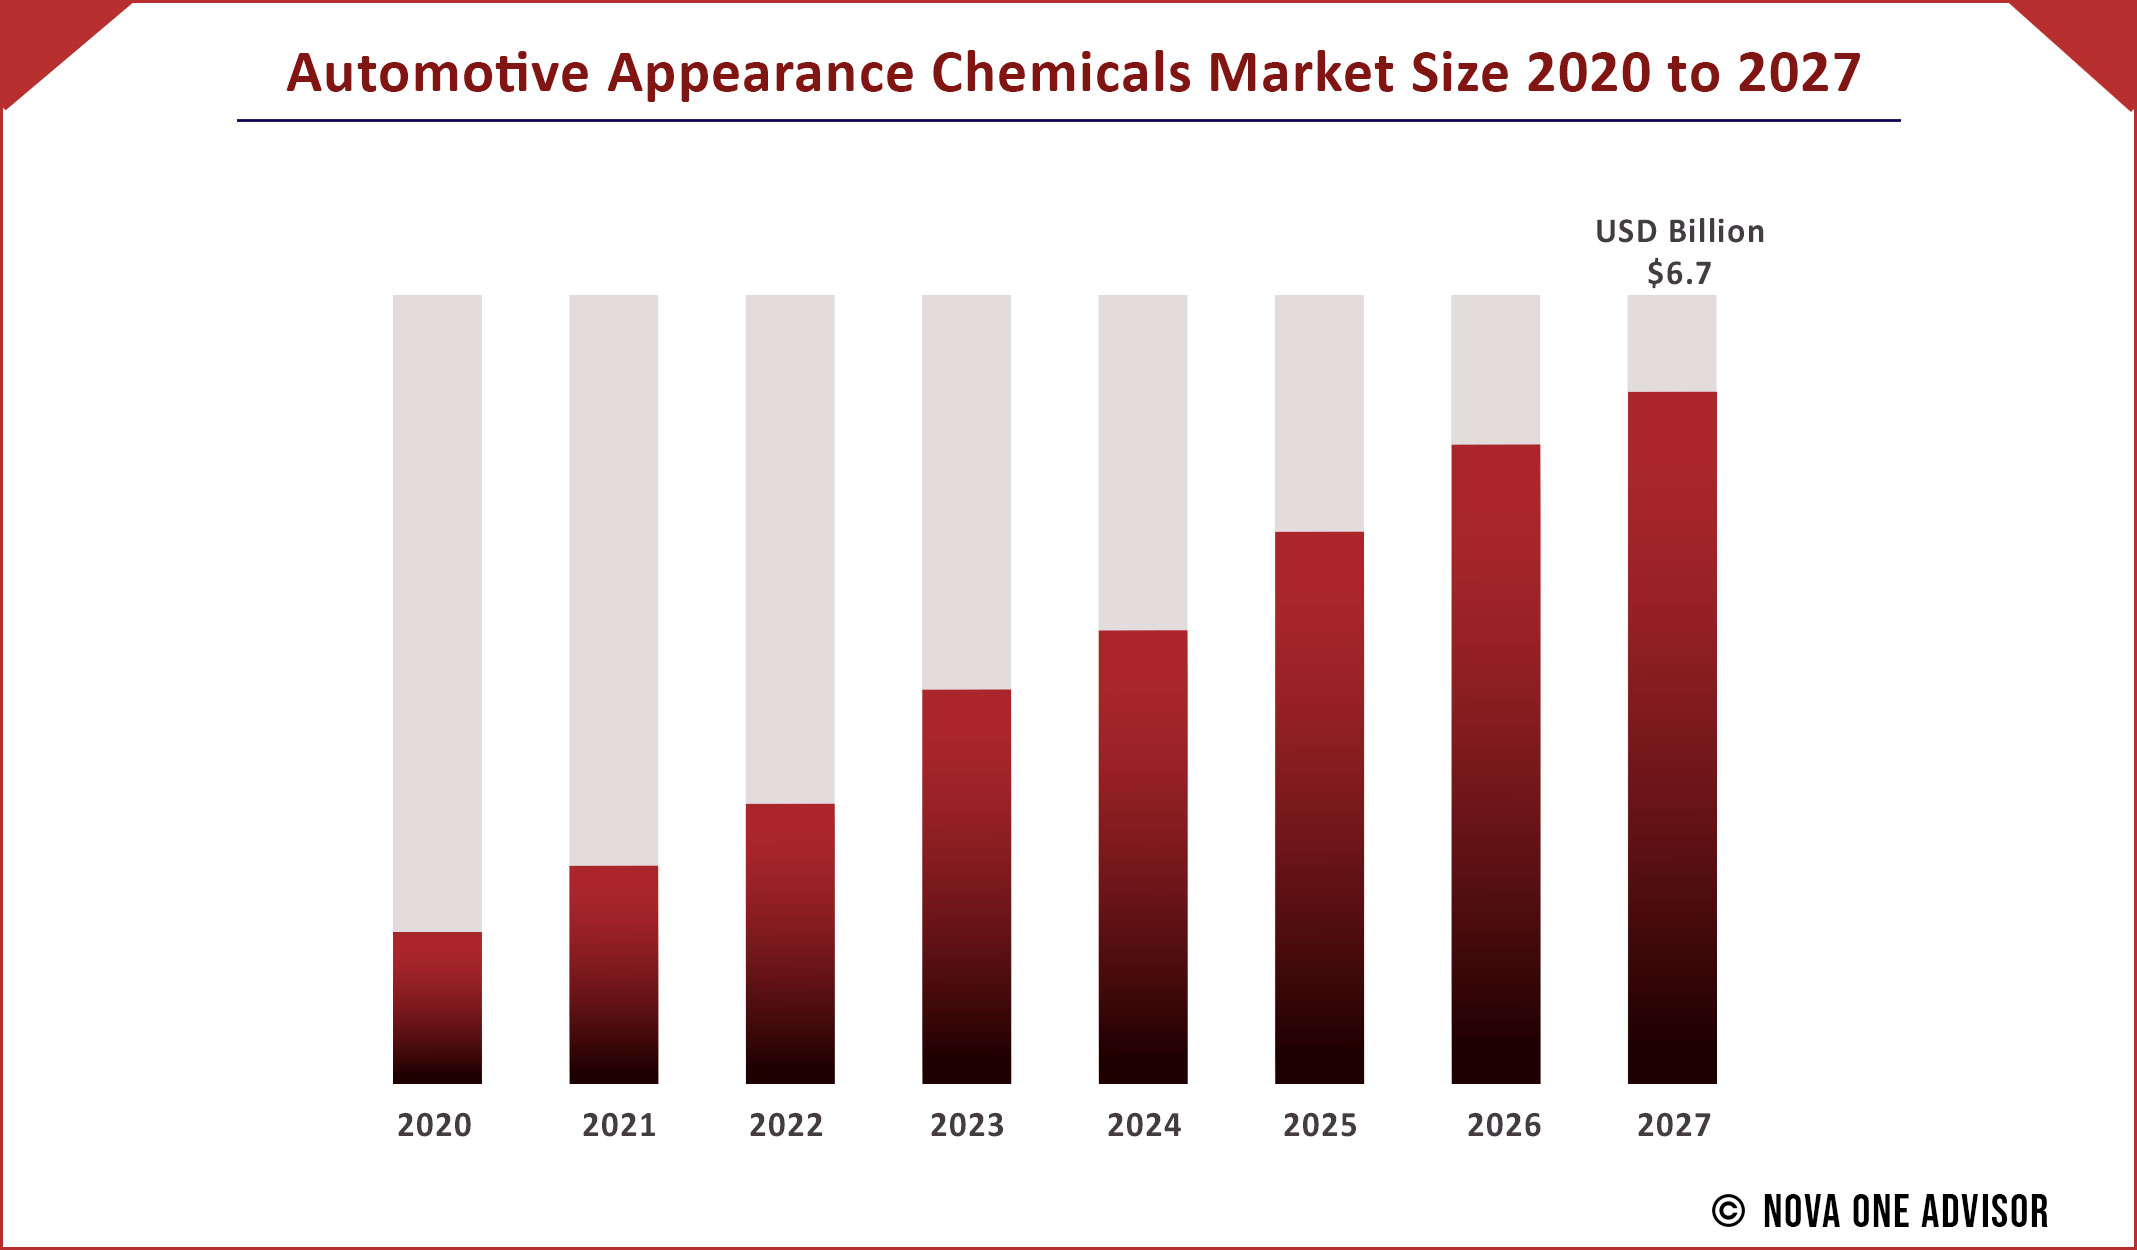 Automotive Appearance Chemicals Market Size 2020 to 2027